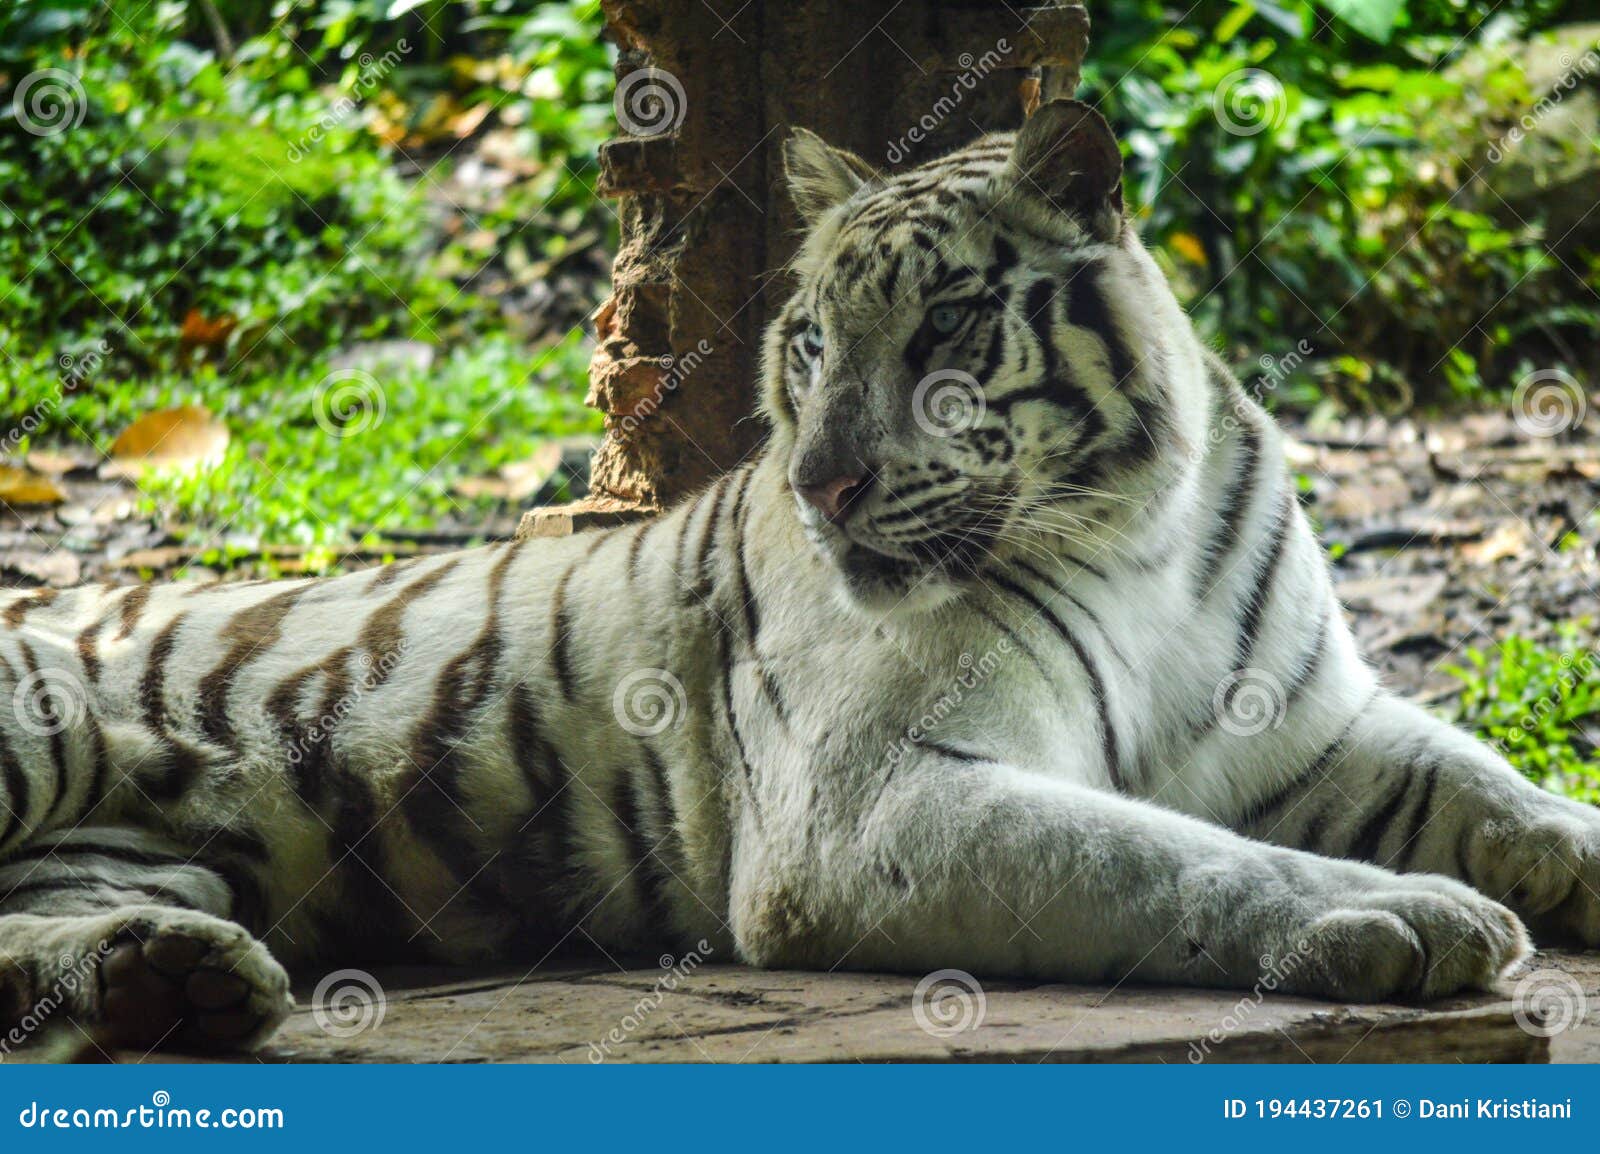 picture of white tiger looks sideway